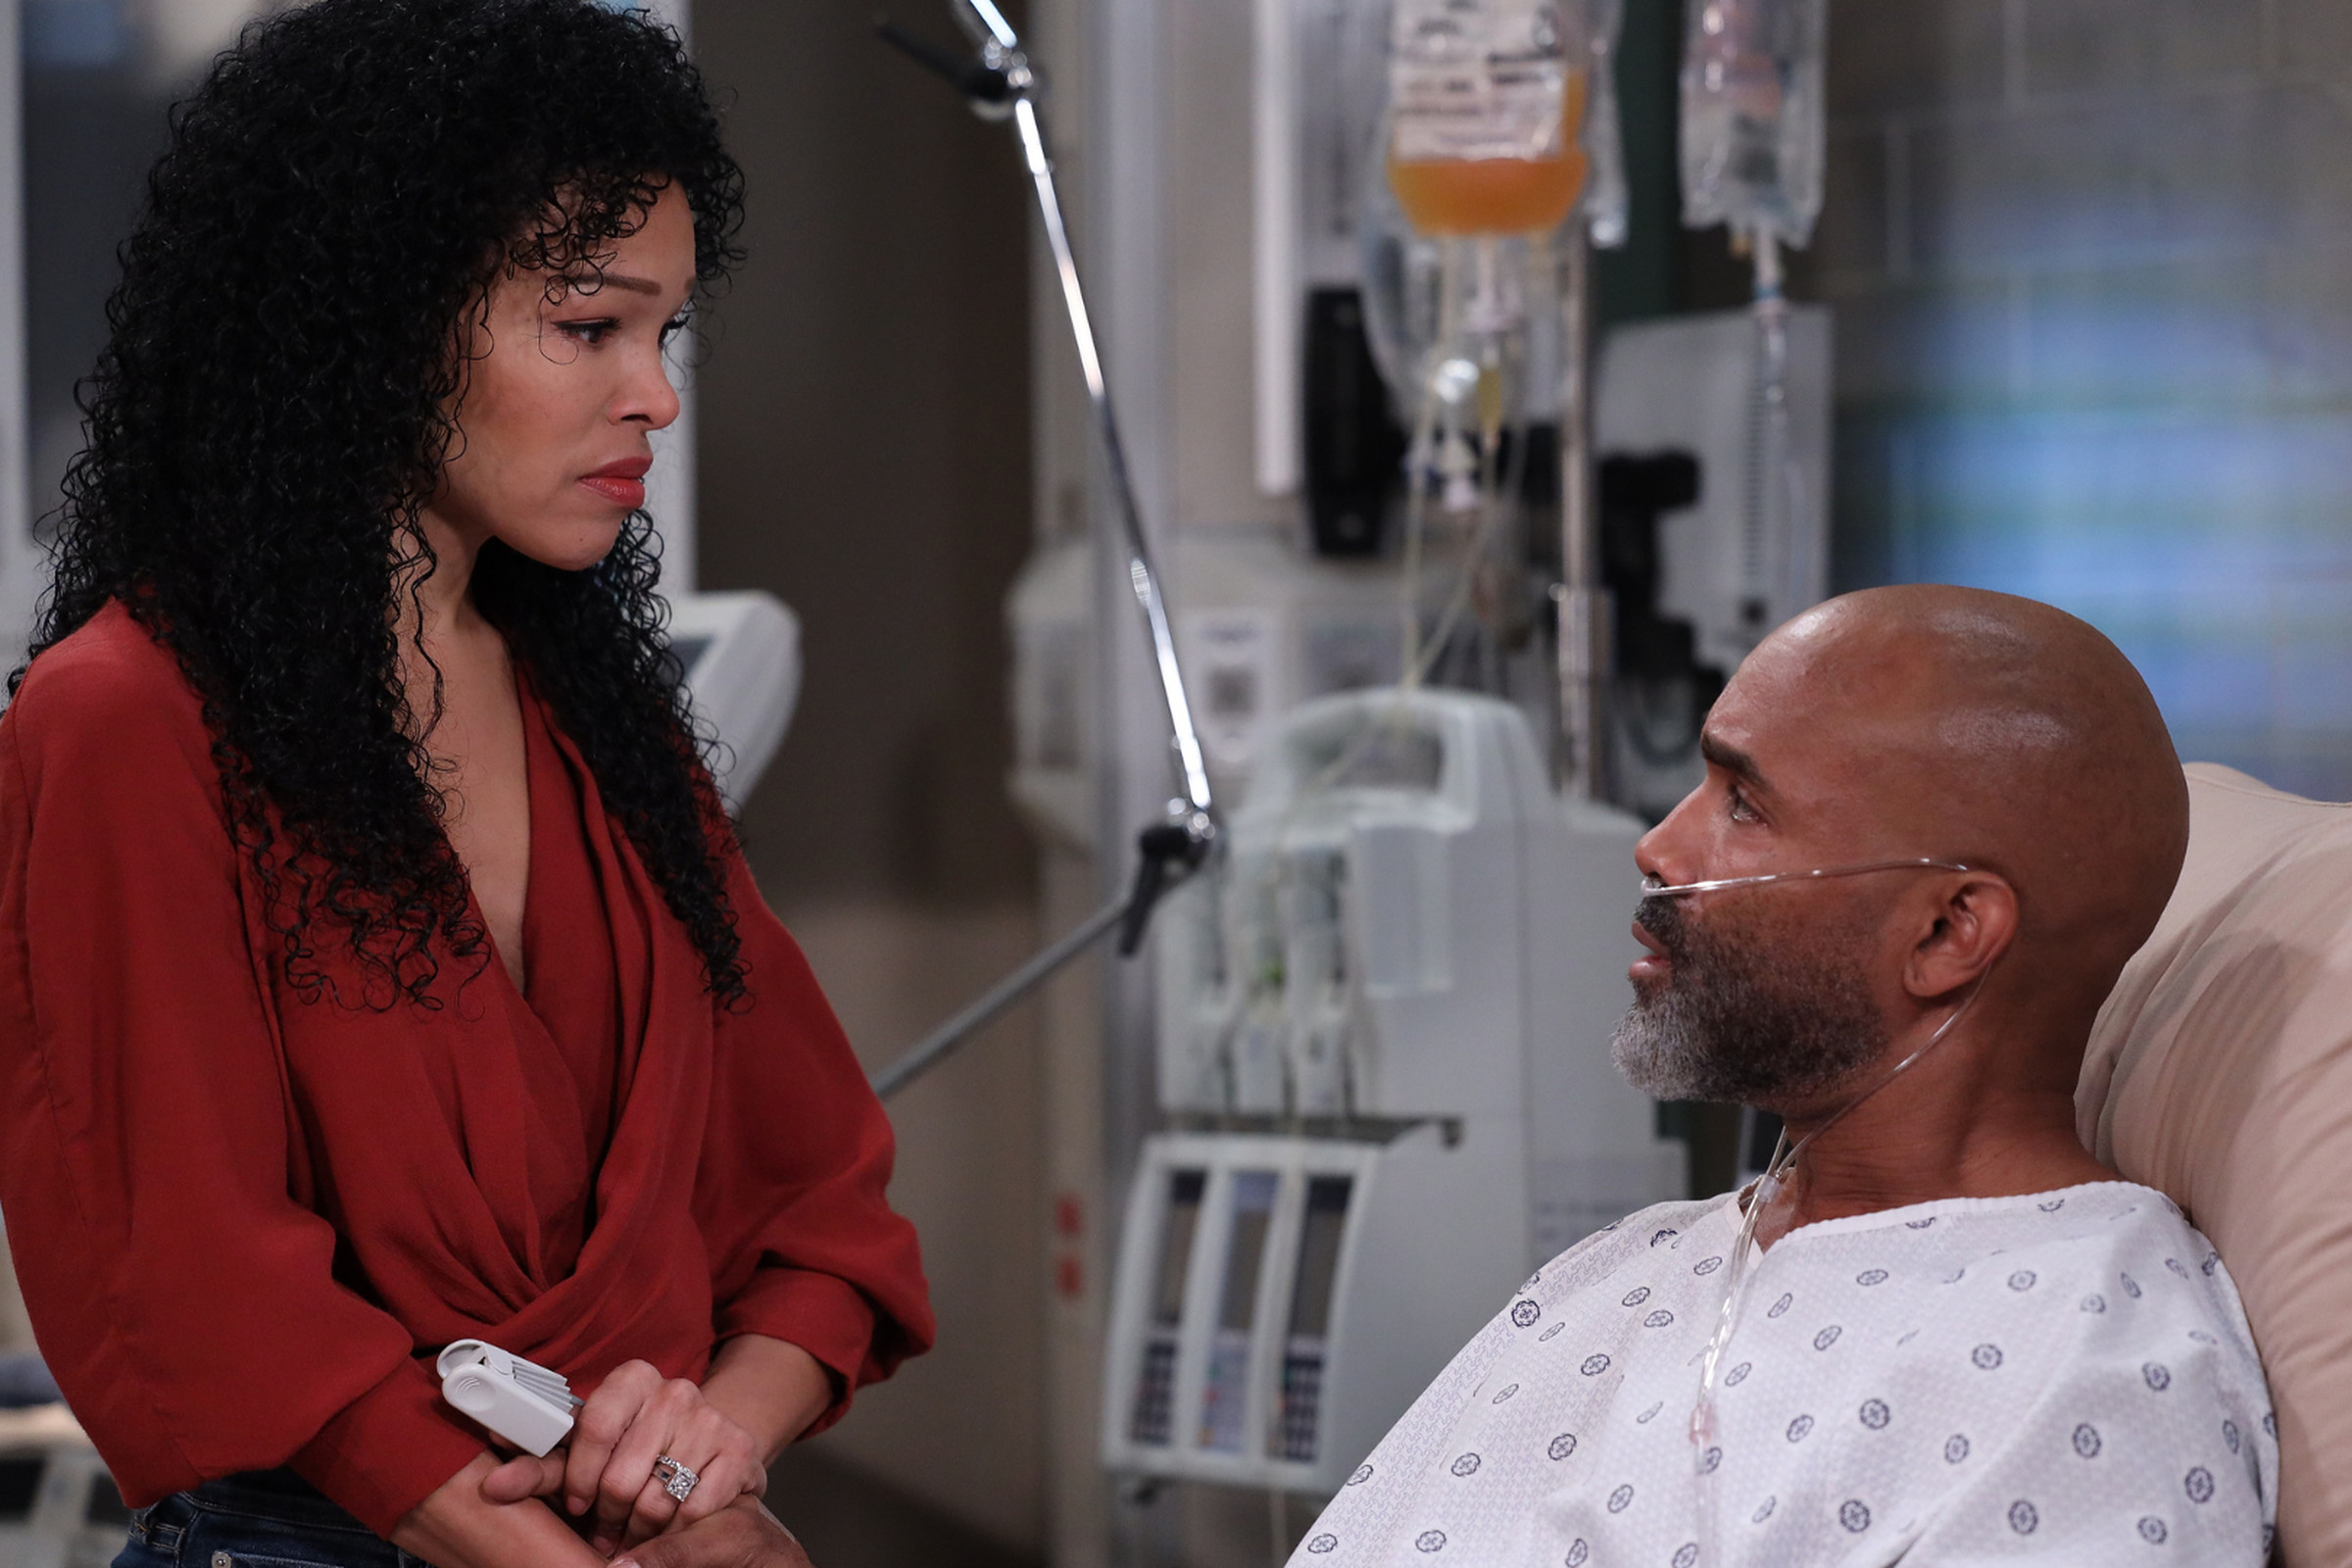 Photo from General Hospital – Episode “15264” featuring a brown woman with curly hair wearing a red shirt speaking to a bald African American man in a hospital bed wearing a hospital gown.